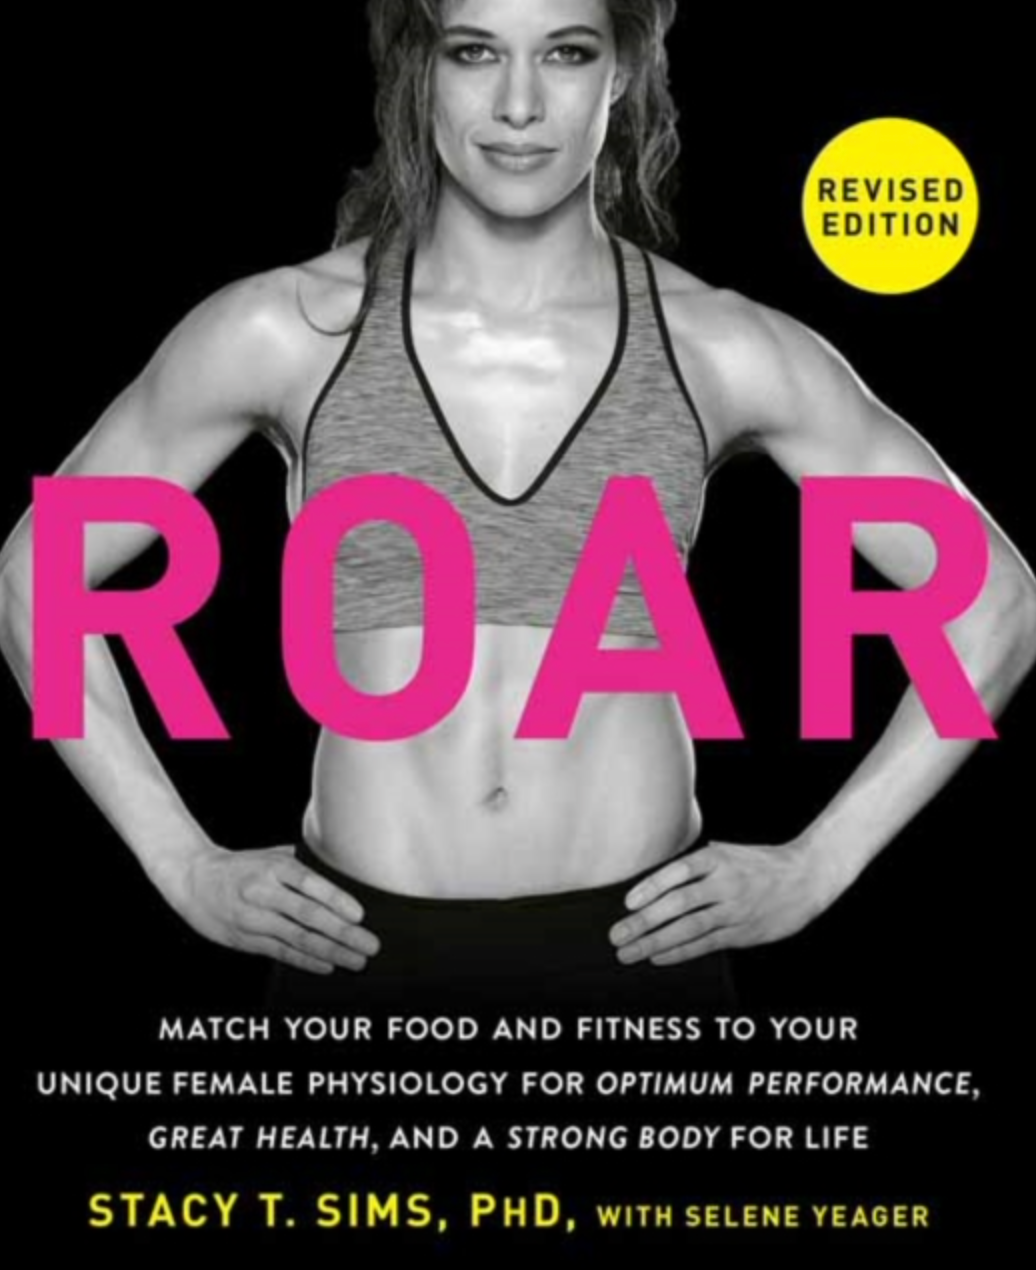 ROAR (Revised Edition) - Stacy T. Sims PhD